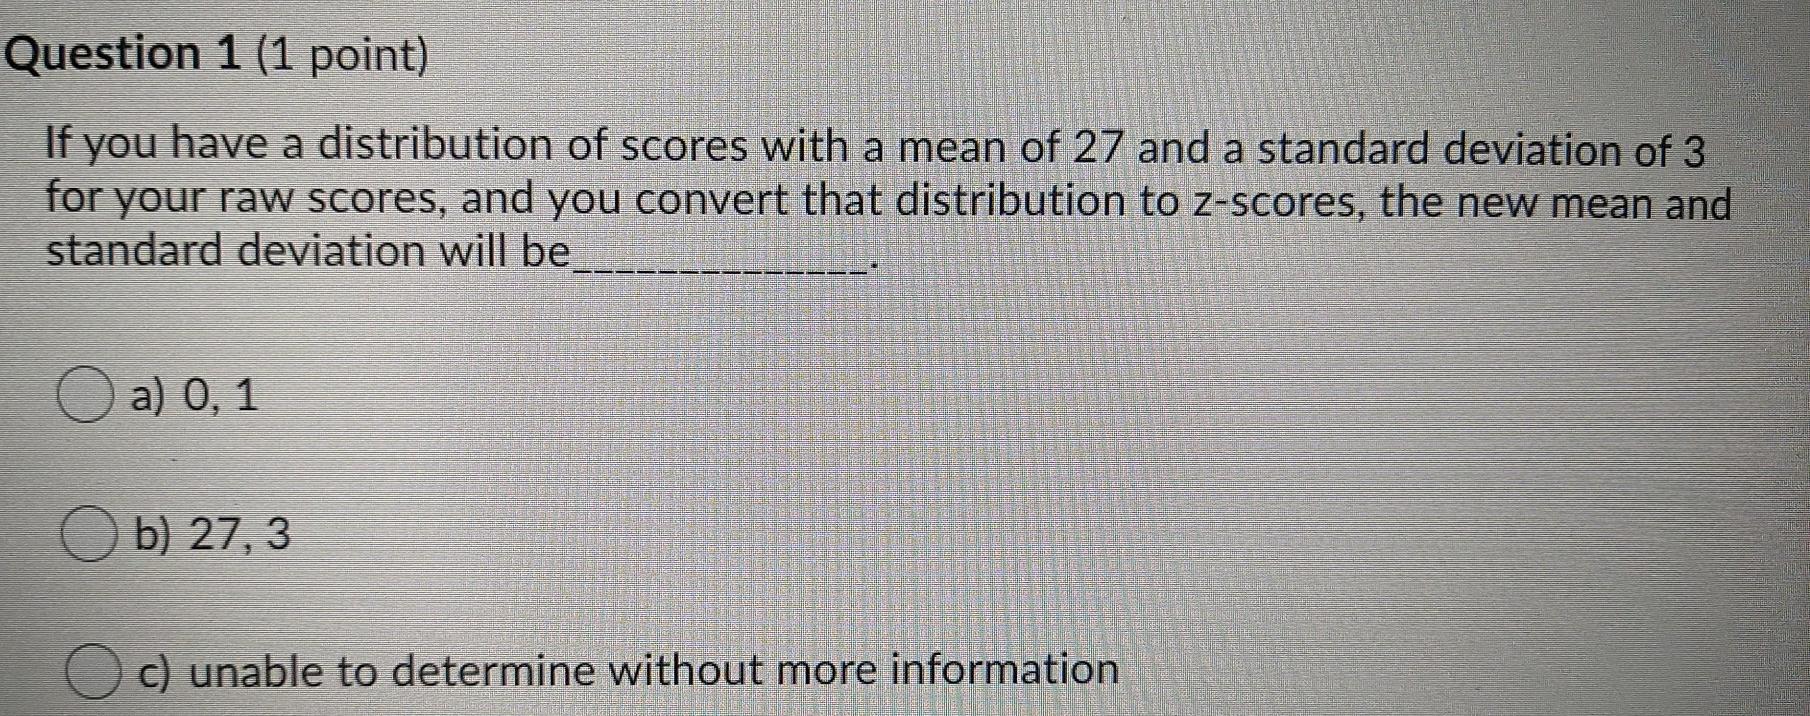 Question 1 1 Point If You Have A Distribution Of Scores With A Mean Of 27 And A Standard Deviation Of 3 For Your Raw S 1